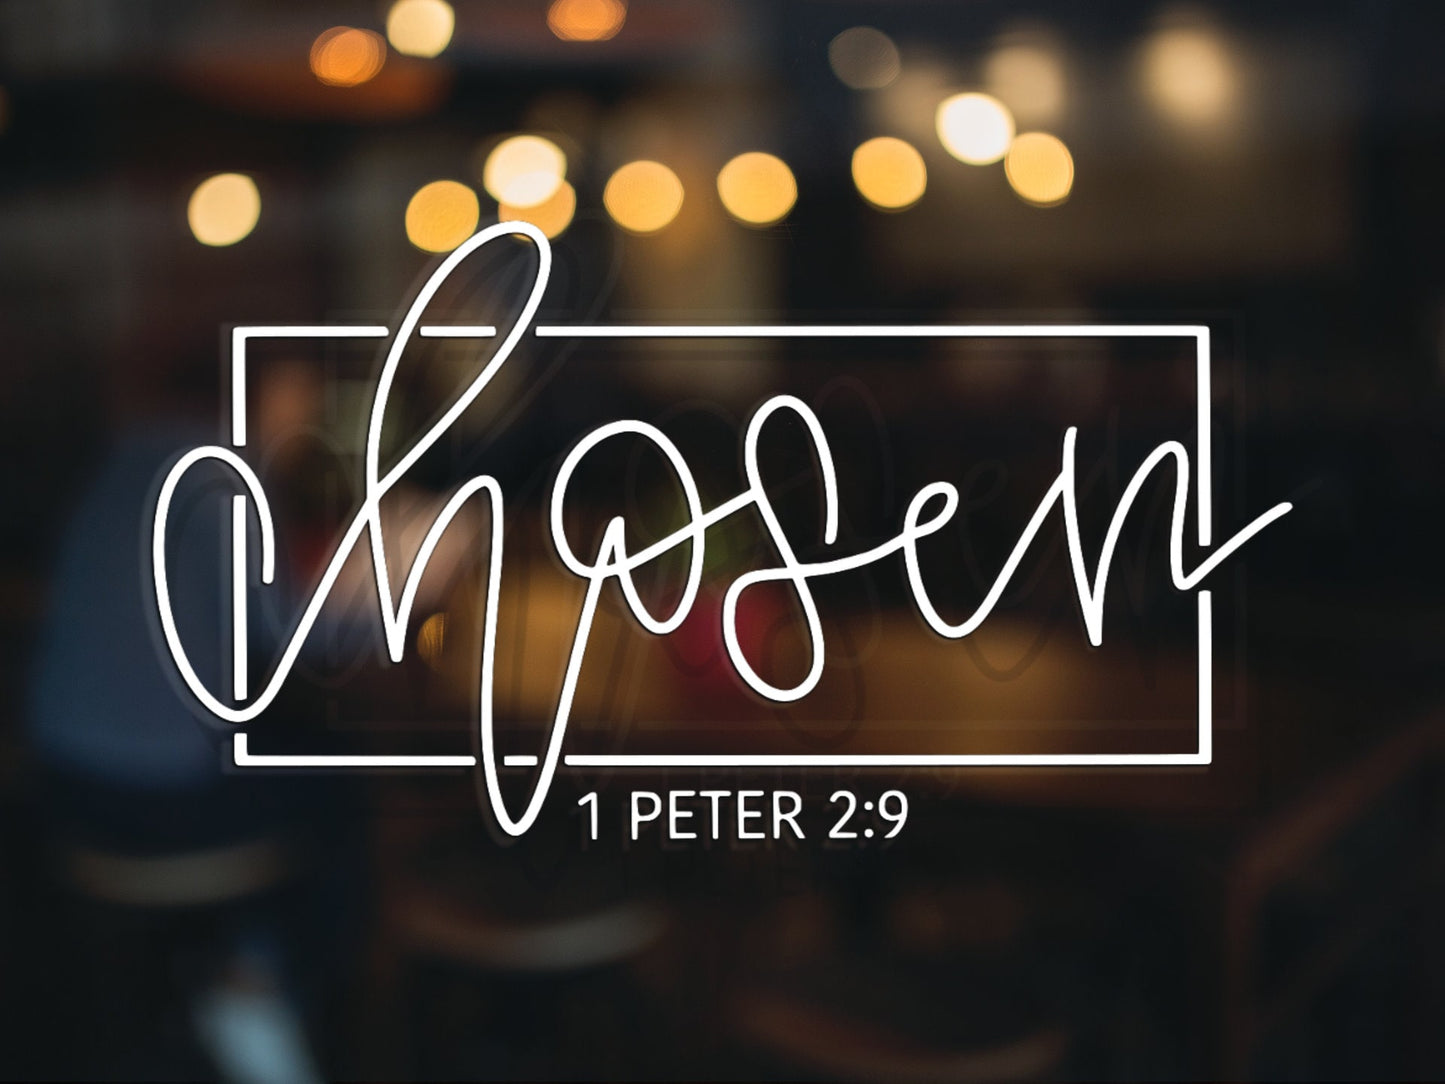 Chosen 1 Peter 2:9 Decal - Many Colors & Sizes